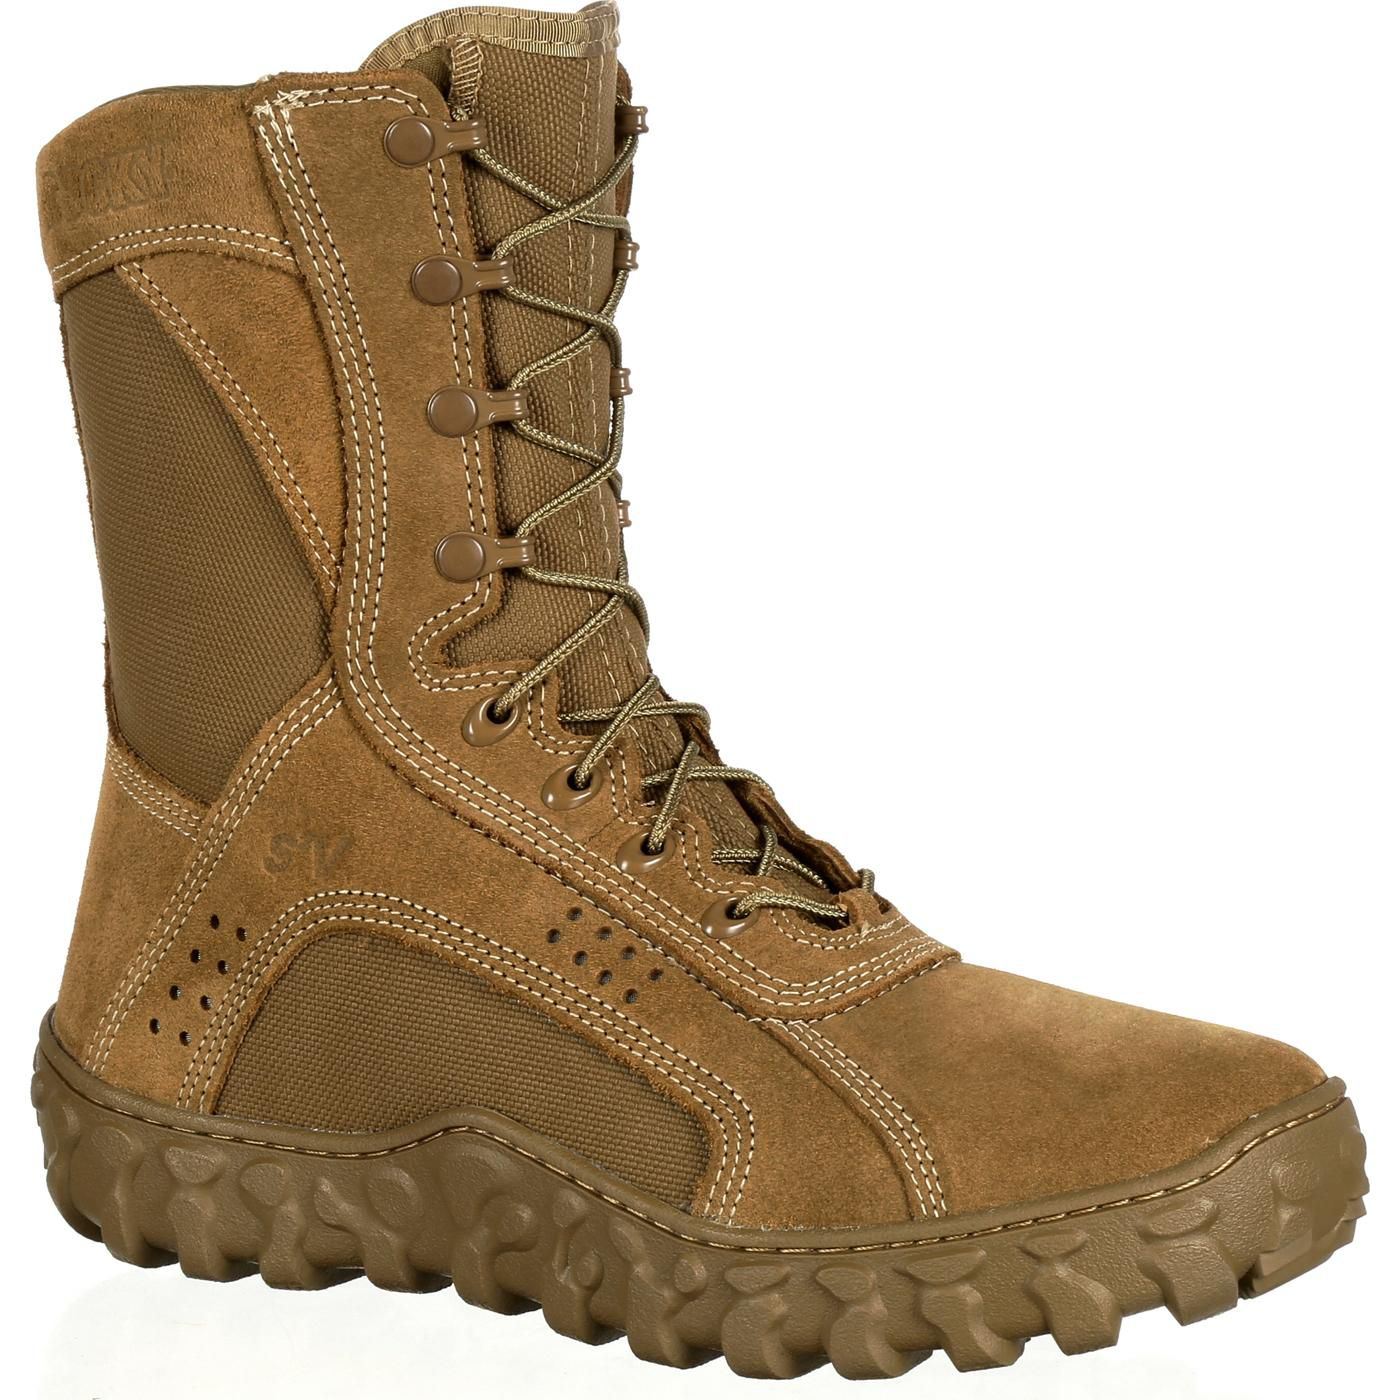 Rocky S2V Tactical Military Boots for Men - Coyote Brown - 12M